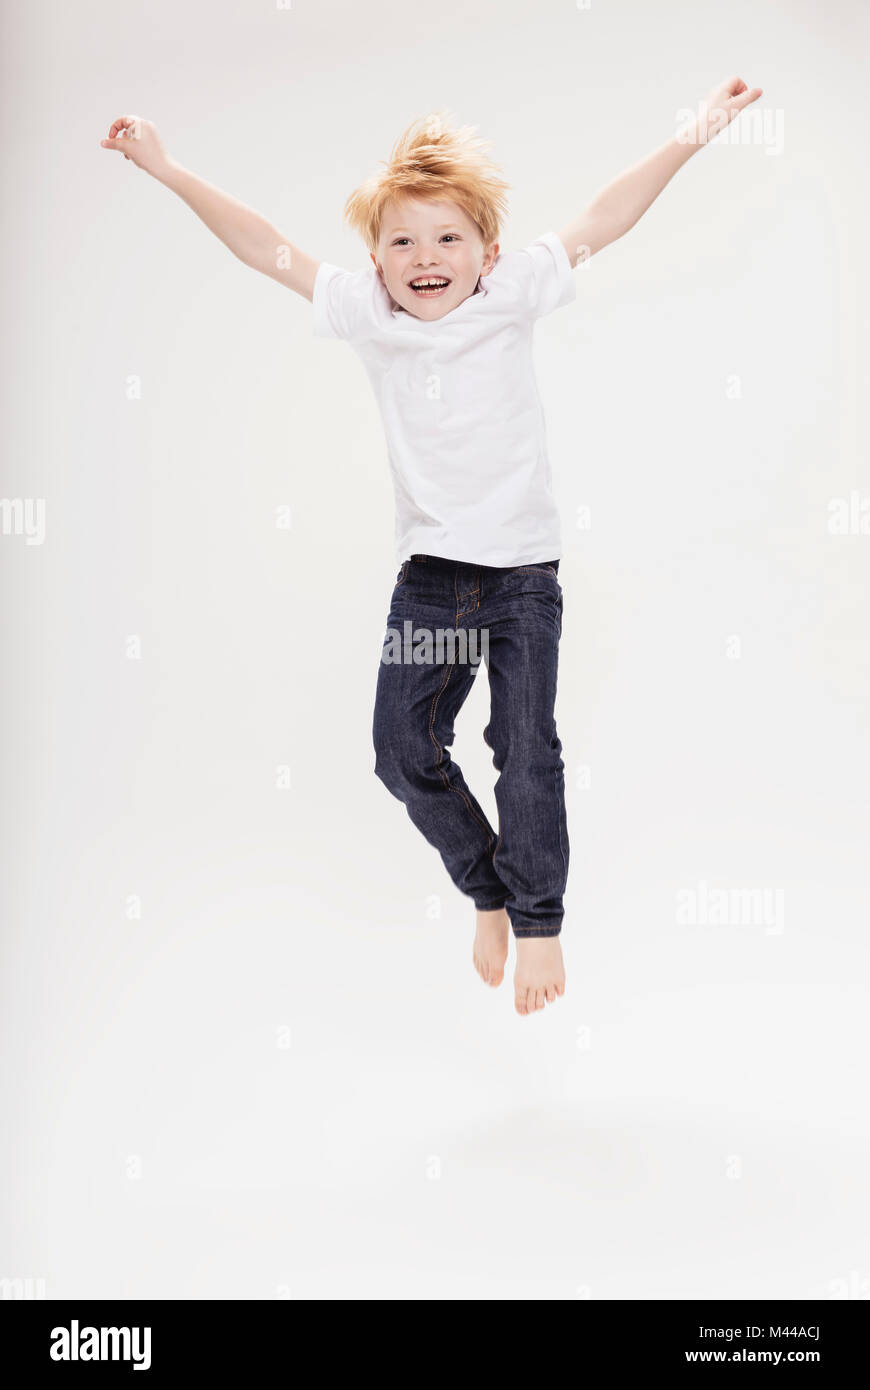 Portrait of boy leaping in air Stock Photo